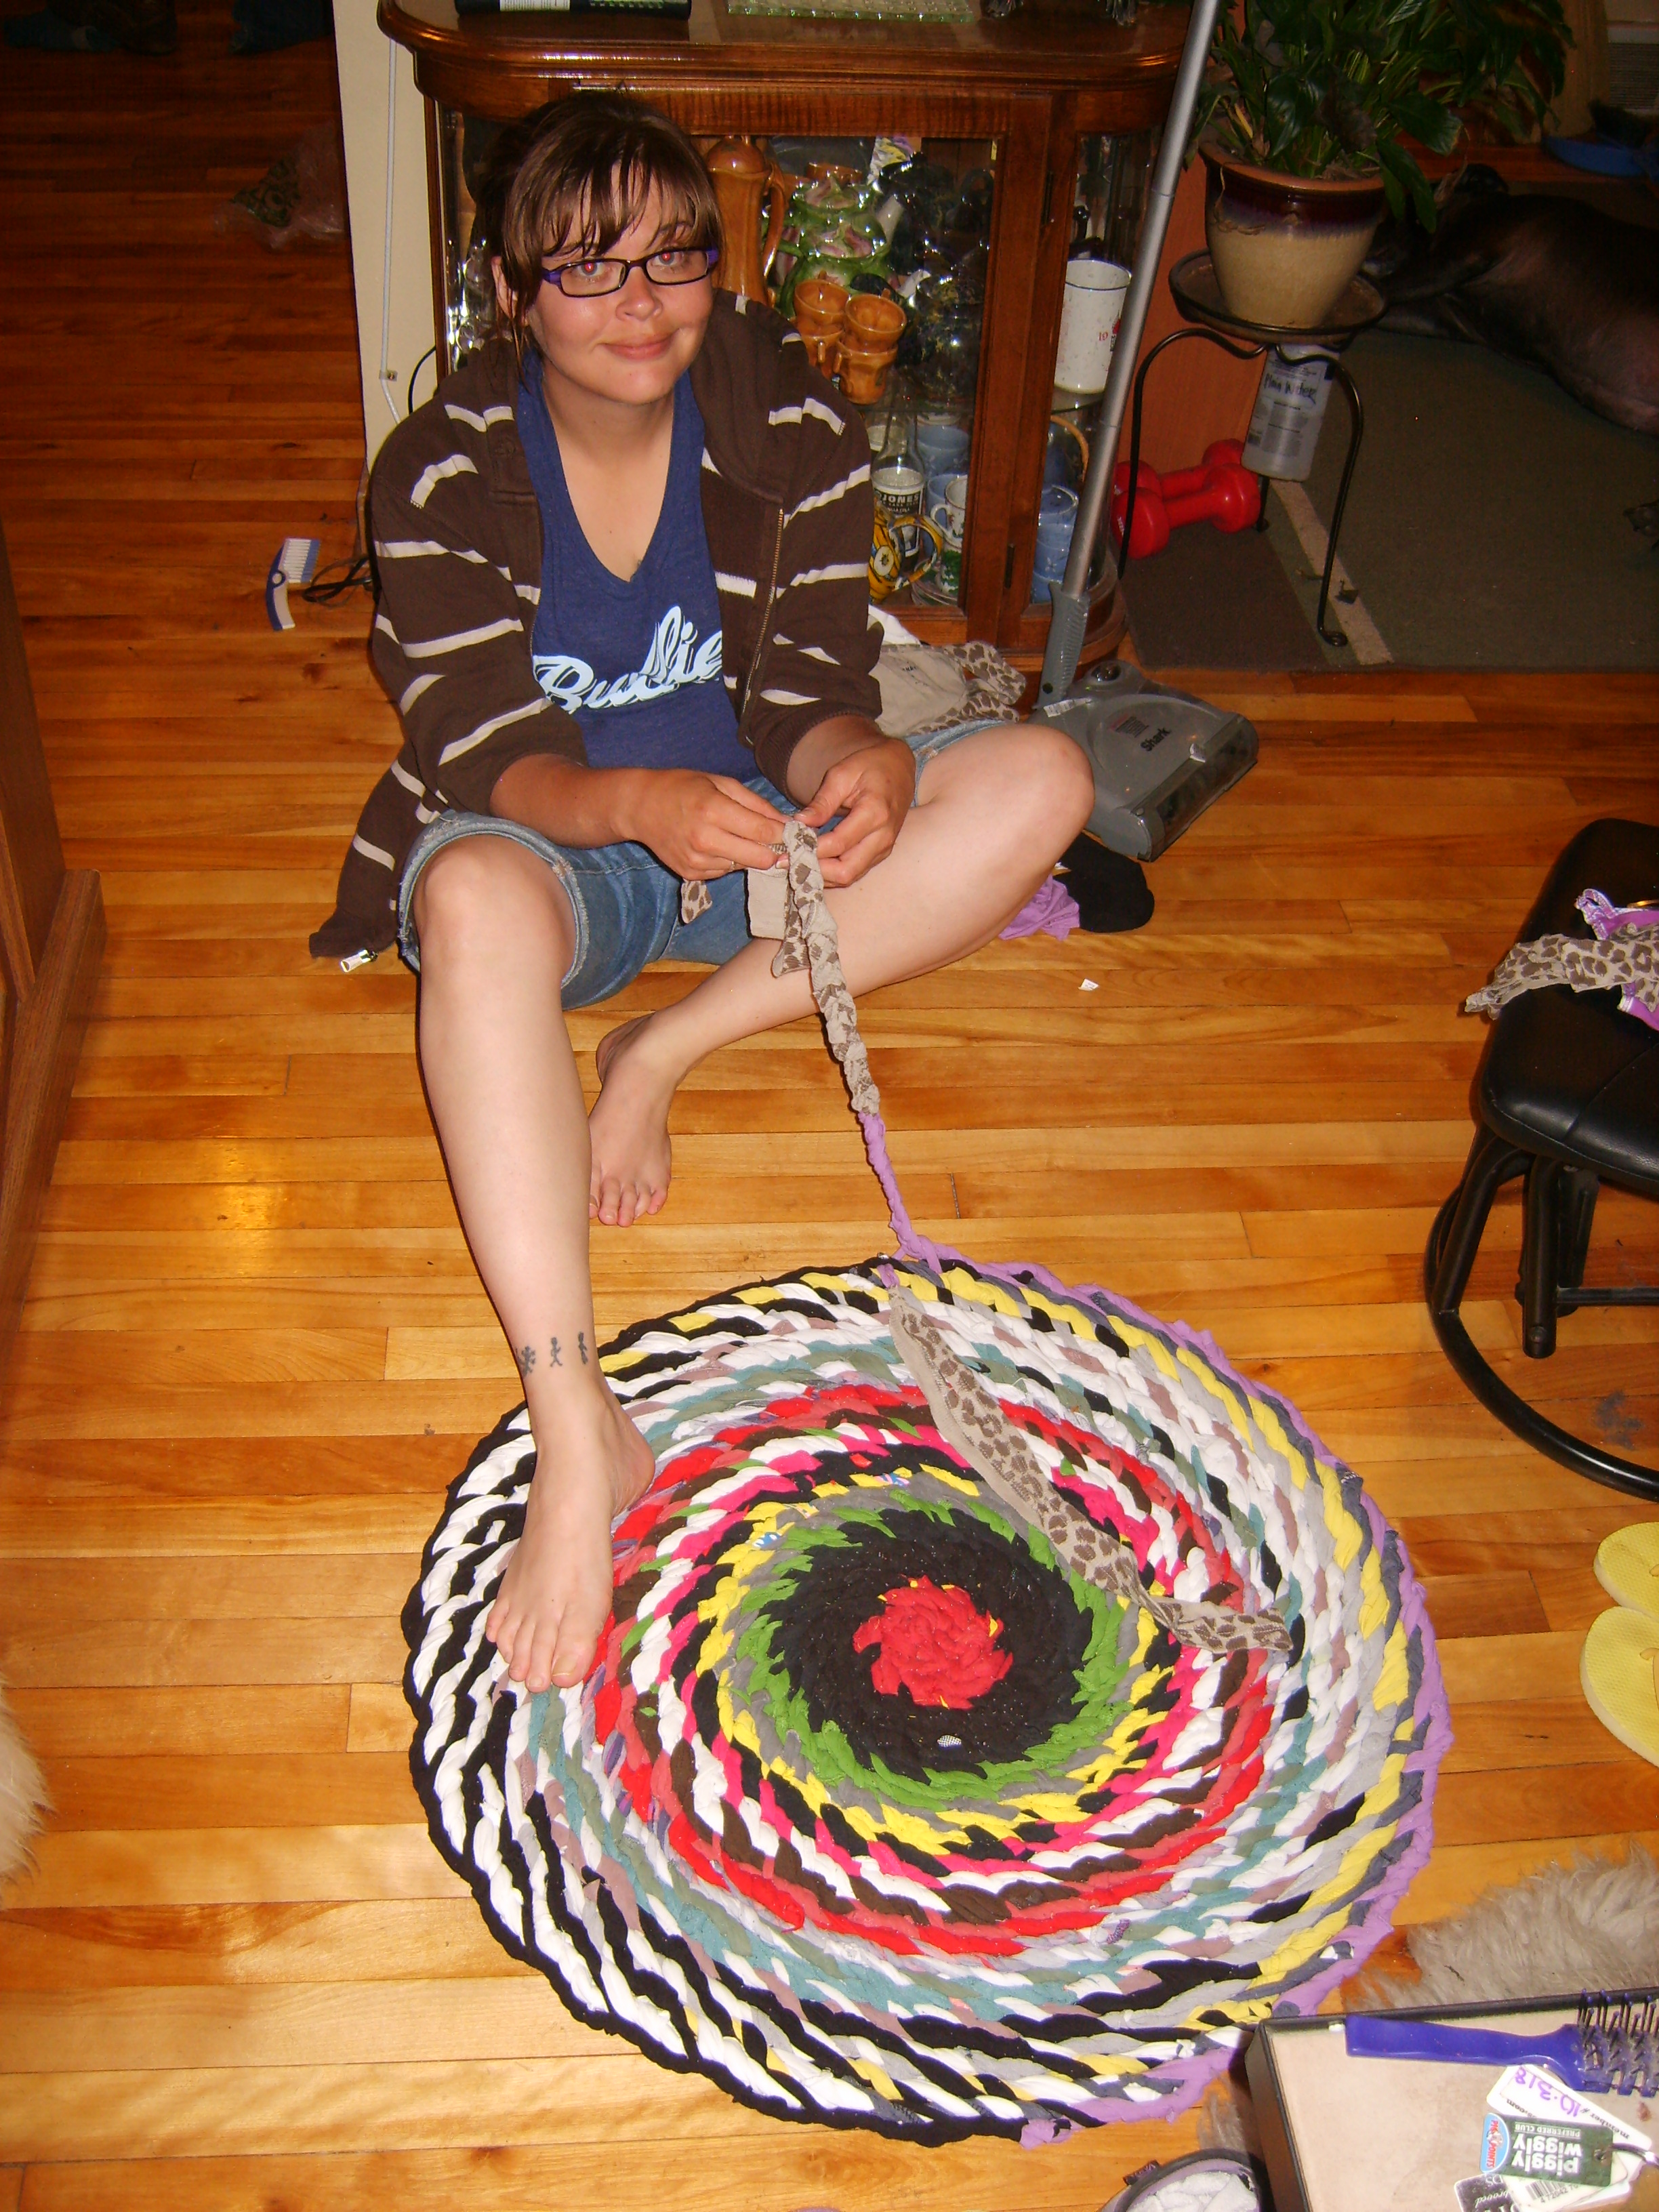 How To Make A Braided Rag Rug From Old Sheets Or T-Shirts